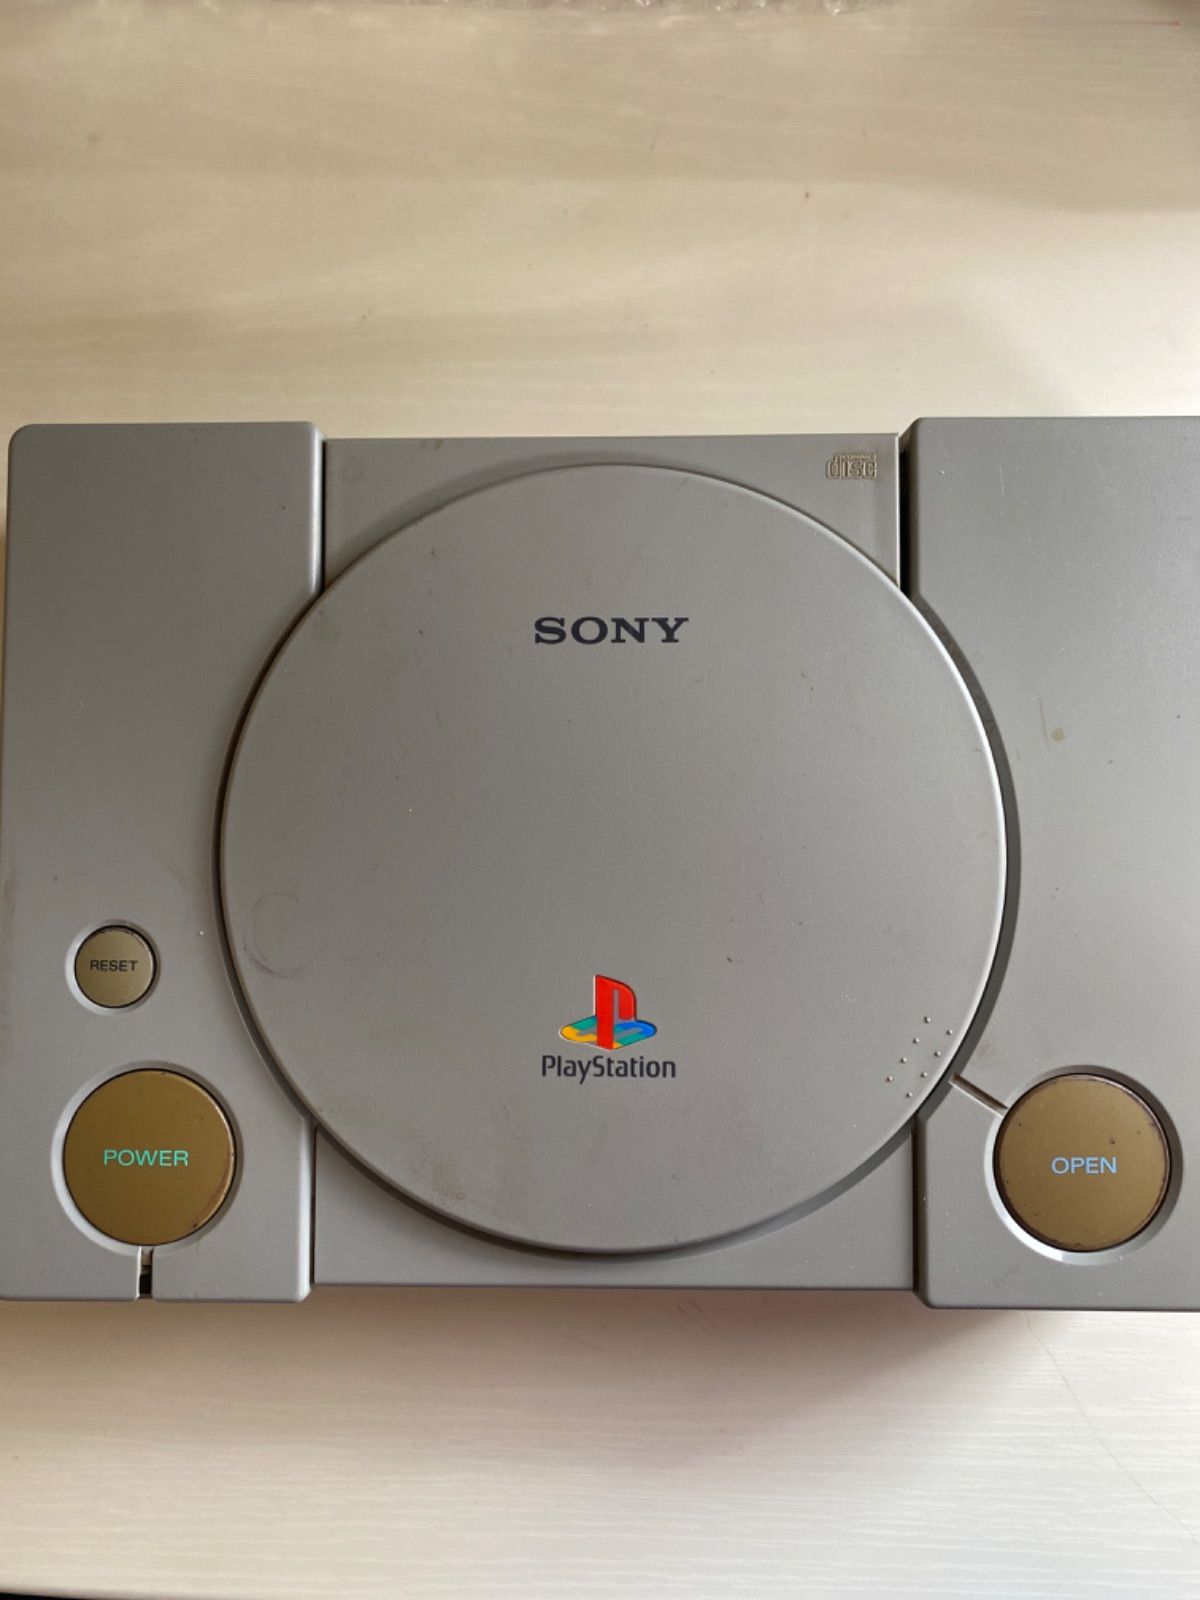 【P-05】SONY PlayStation SCPH-5500 コントローラー一個付き